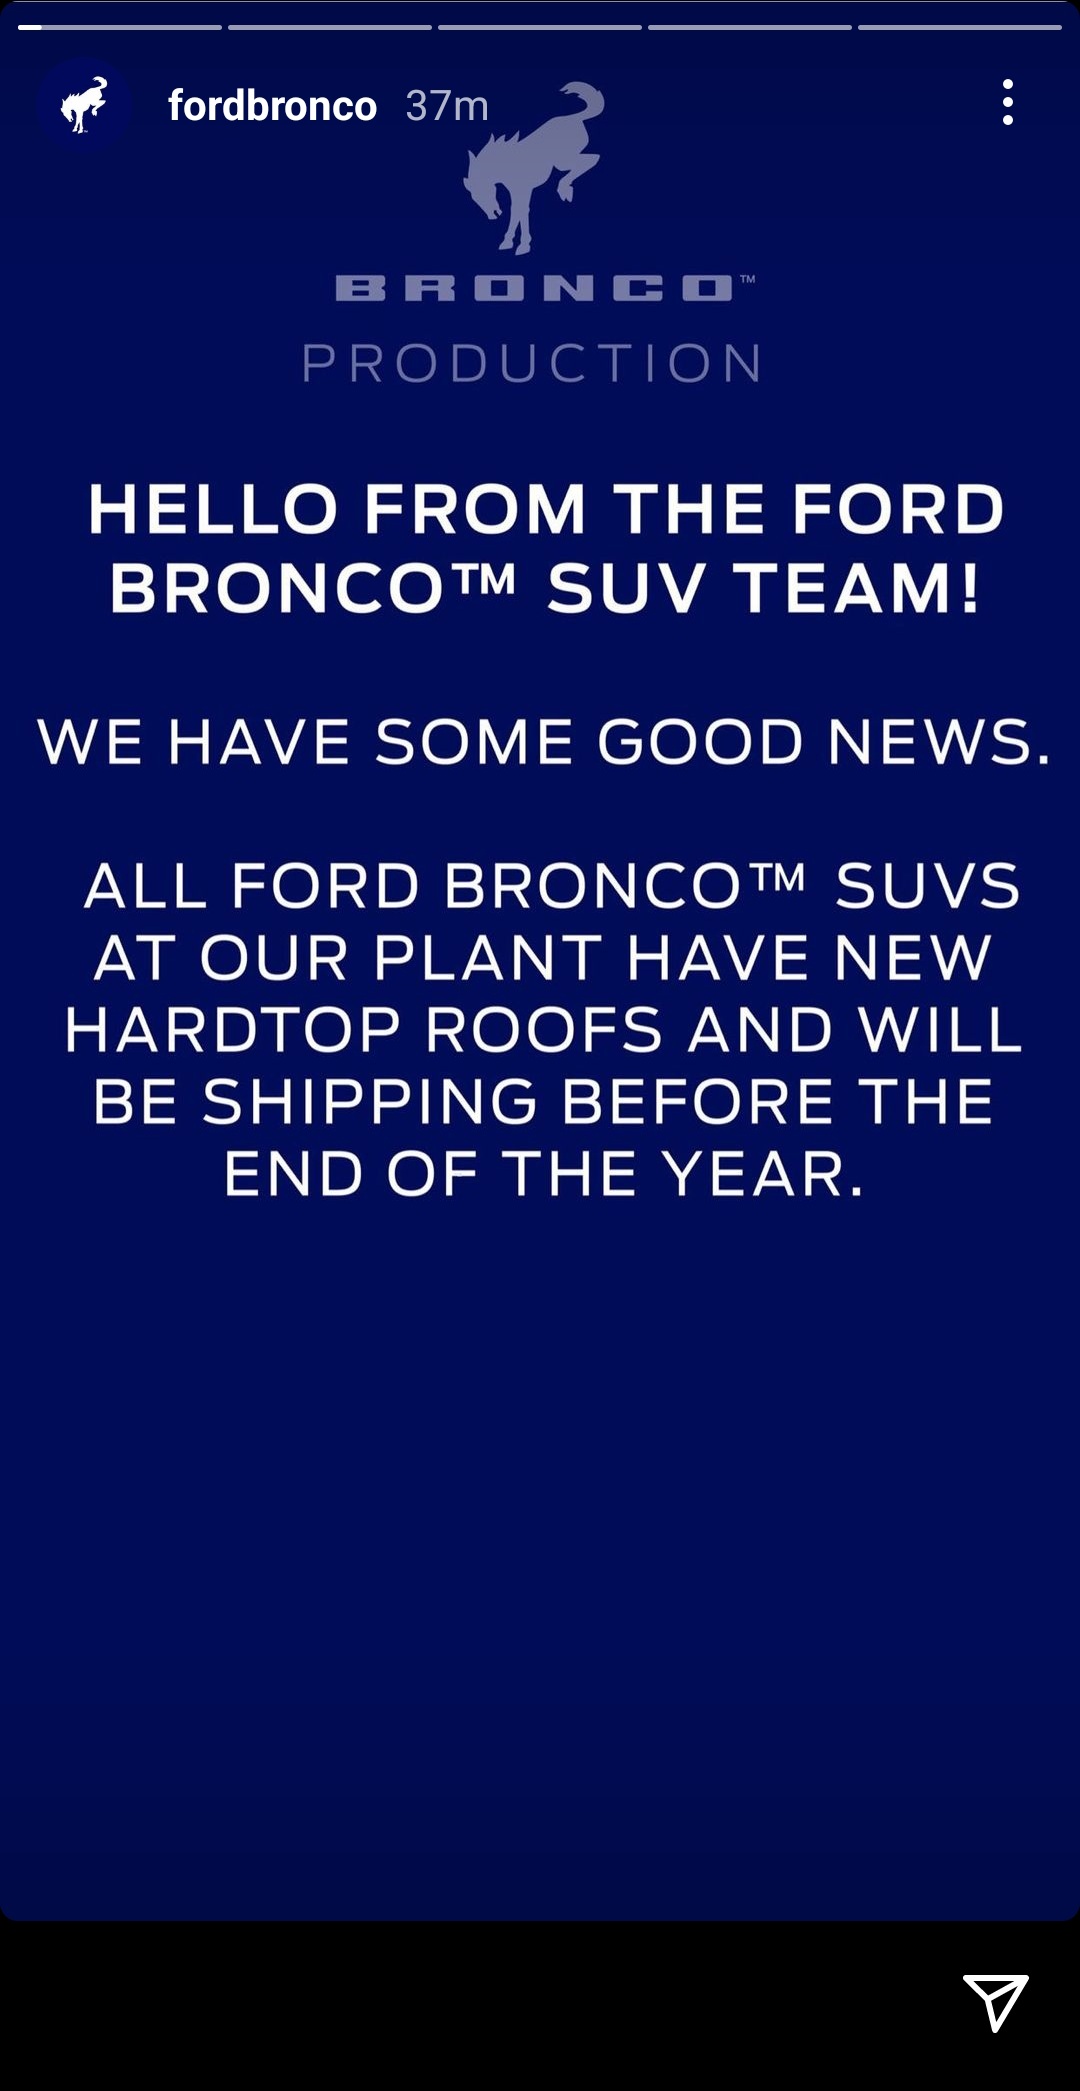 Ford Bronco From Ford: all currently built Broncos at factory have new MIC hardtops and will ship by end of year Screenshot_20211206-123640_Instagram